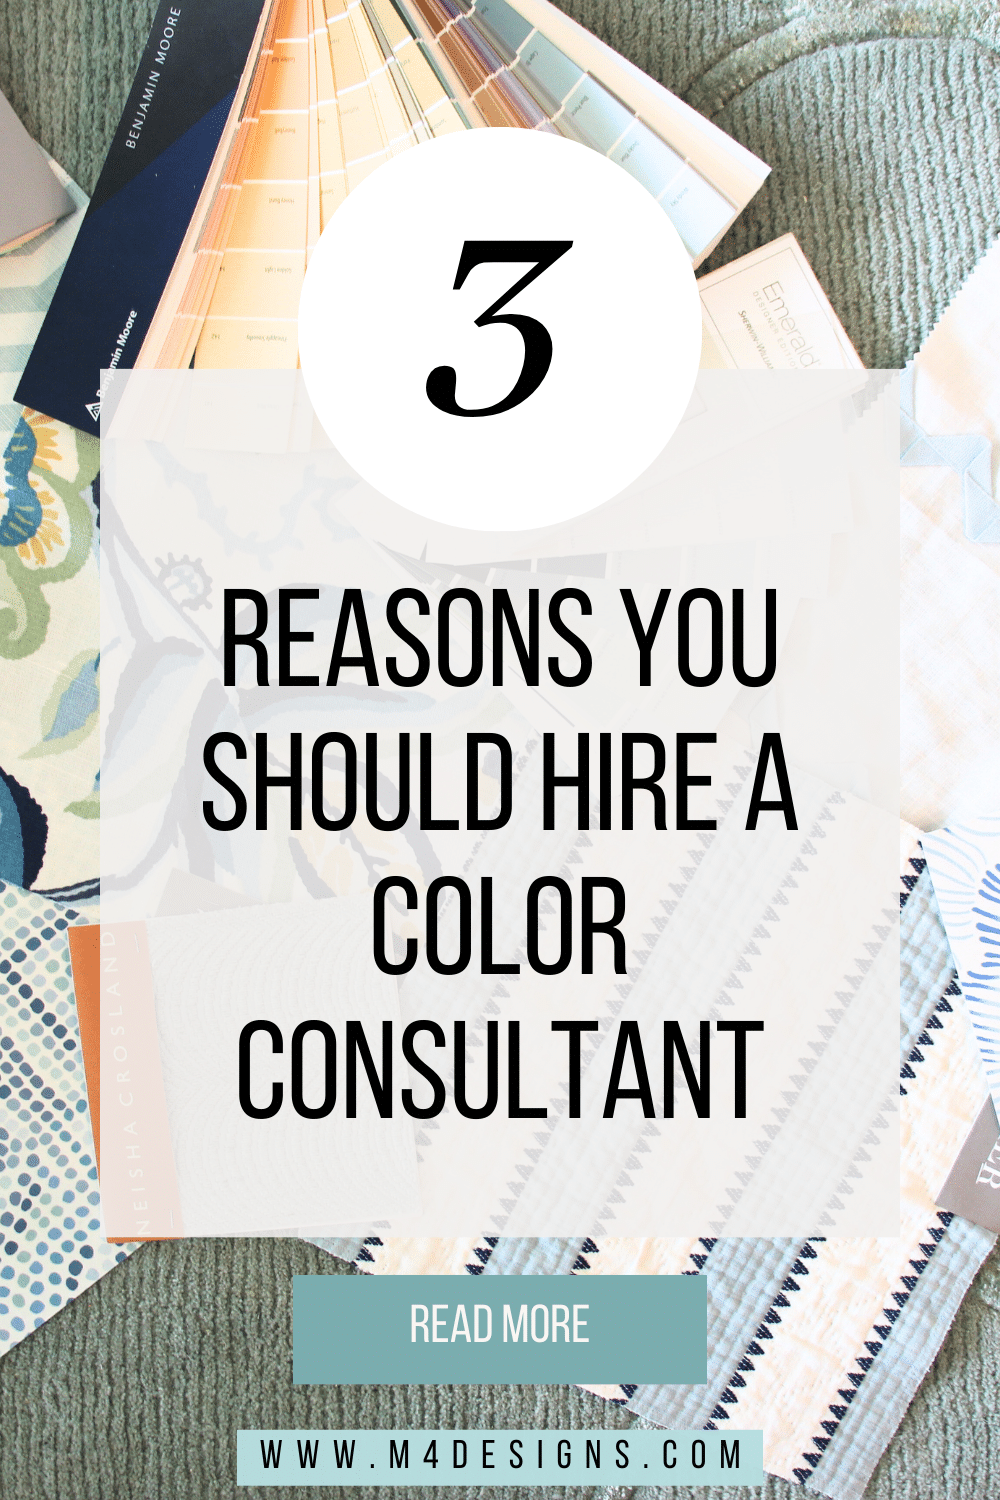 Reasons you should hire a color consultant 